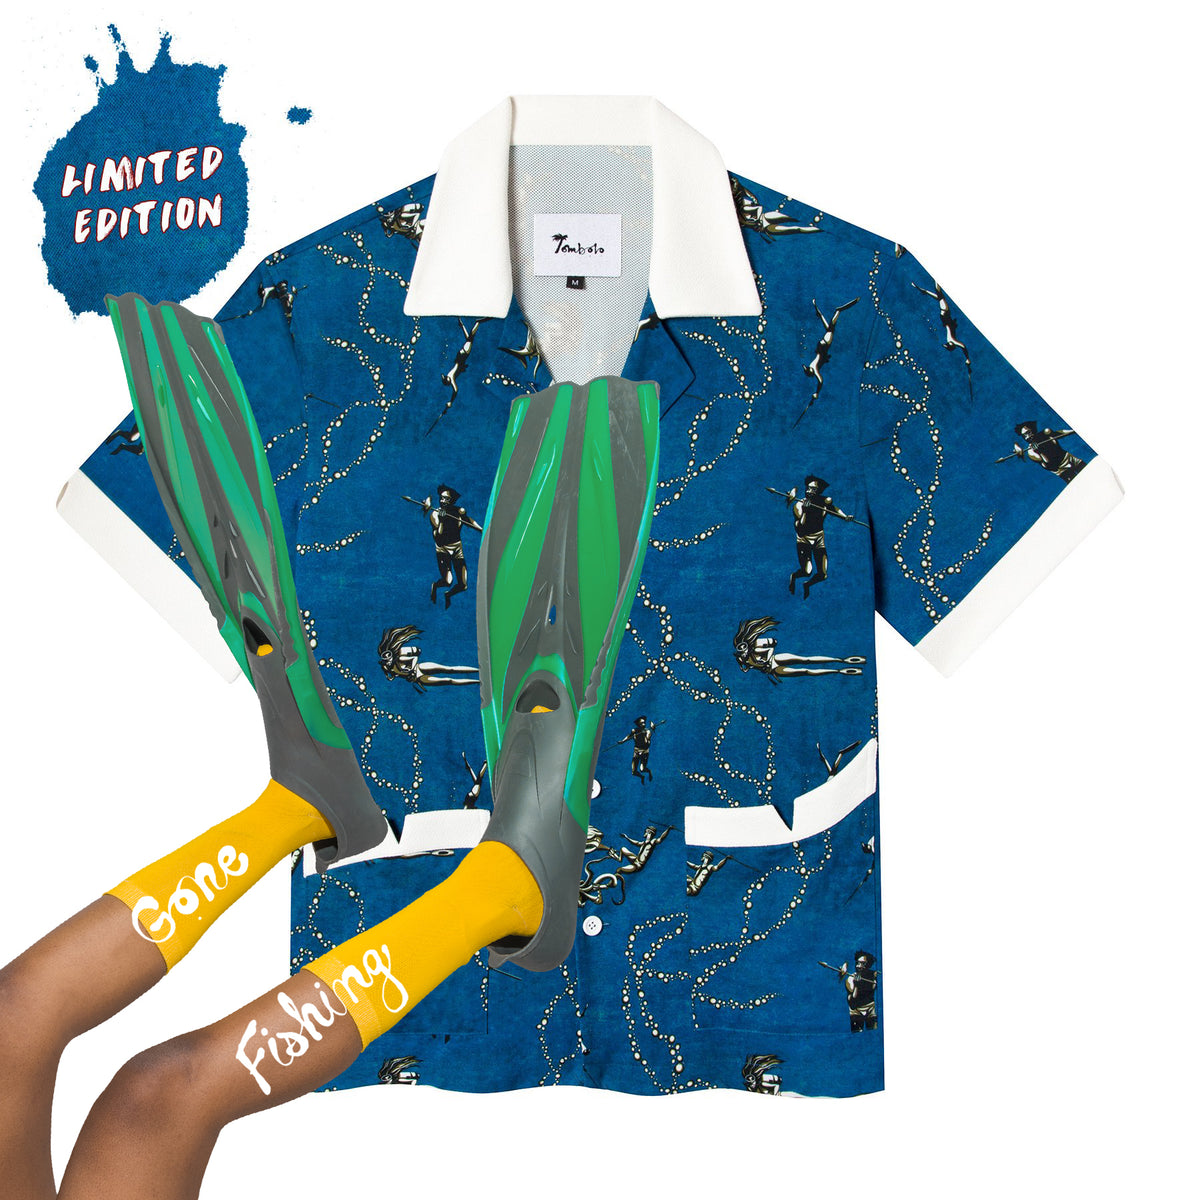 The Key West Special' Fishing Shirt